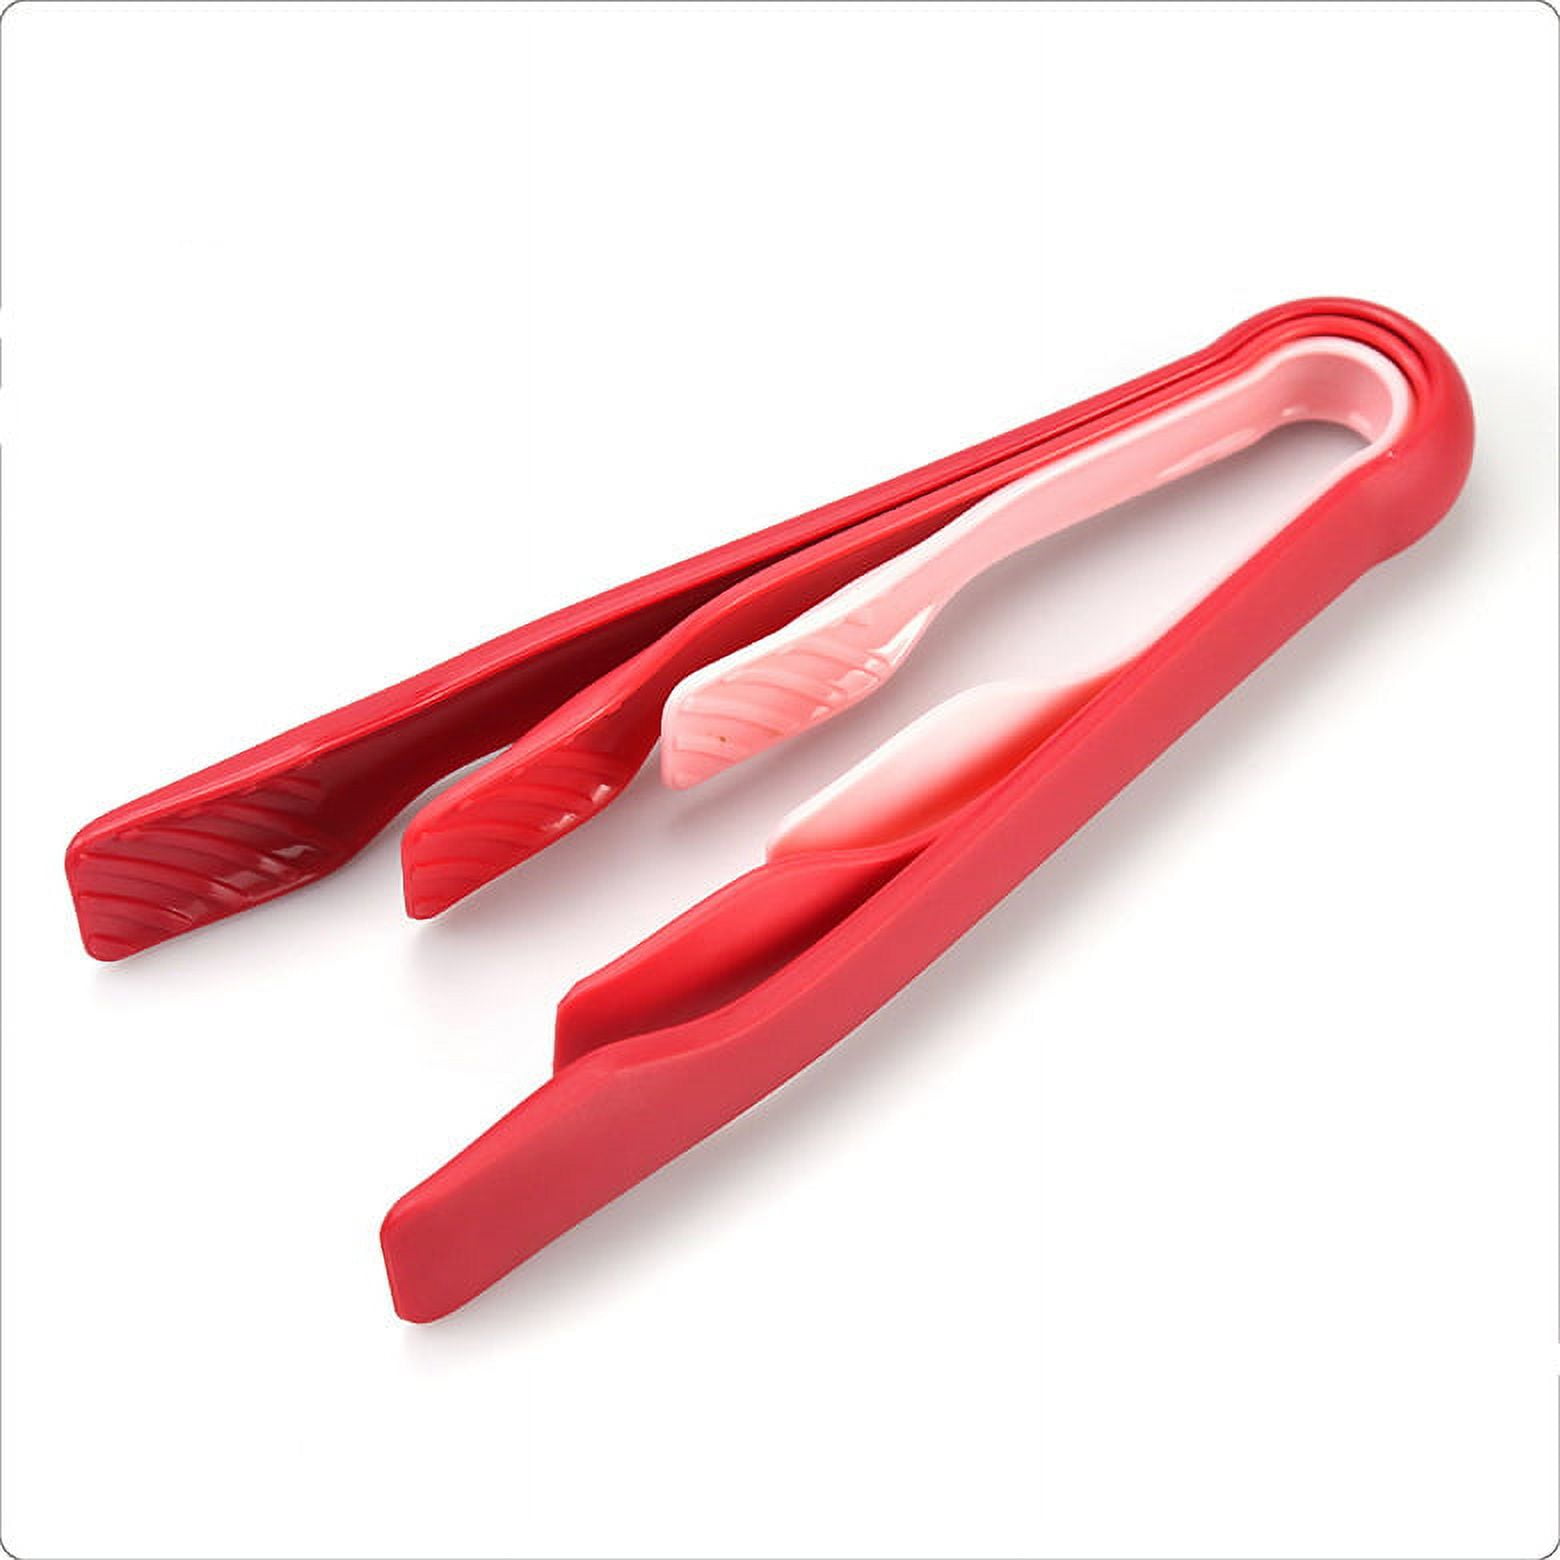 Dropship 1pc Non-Slip Stainless Steel Food Tongs Meat Salad Bread